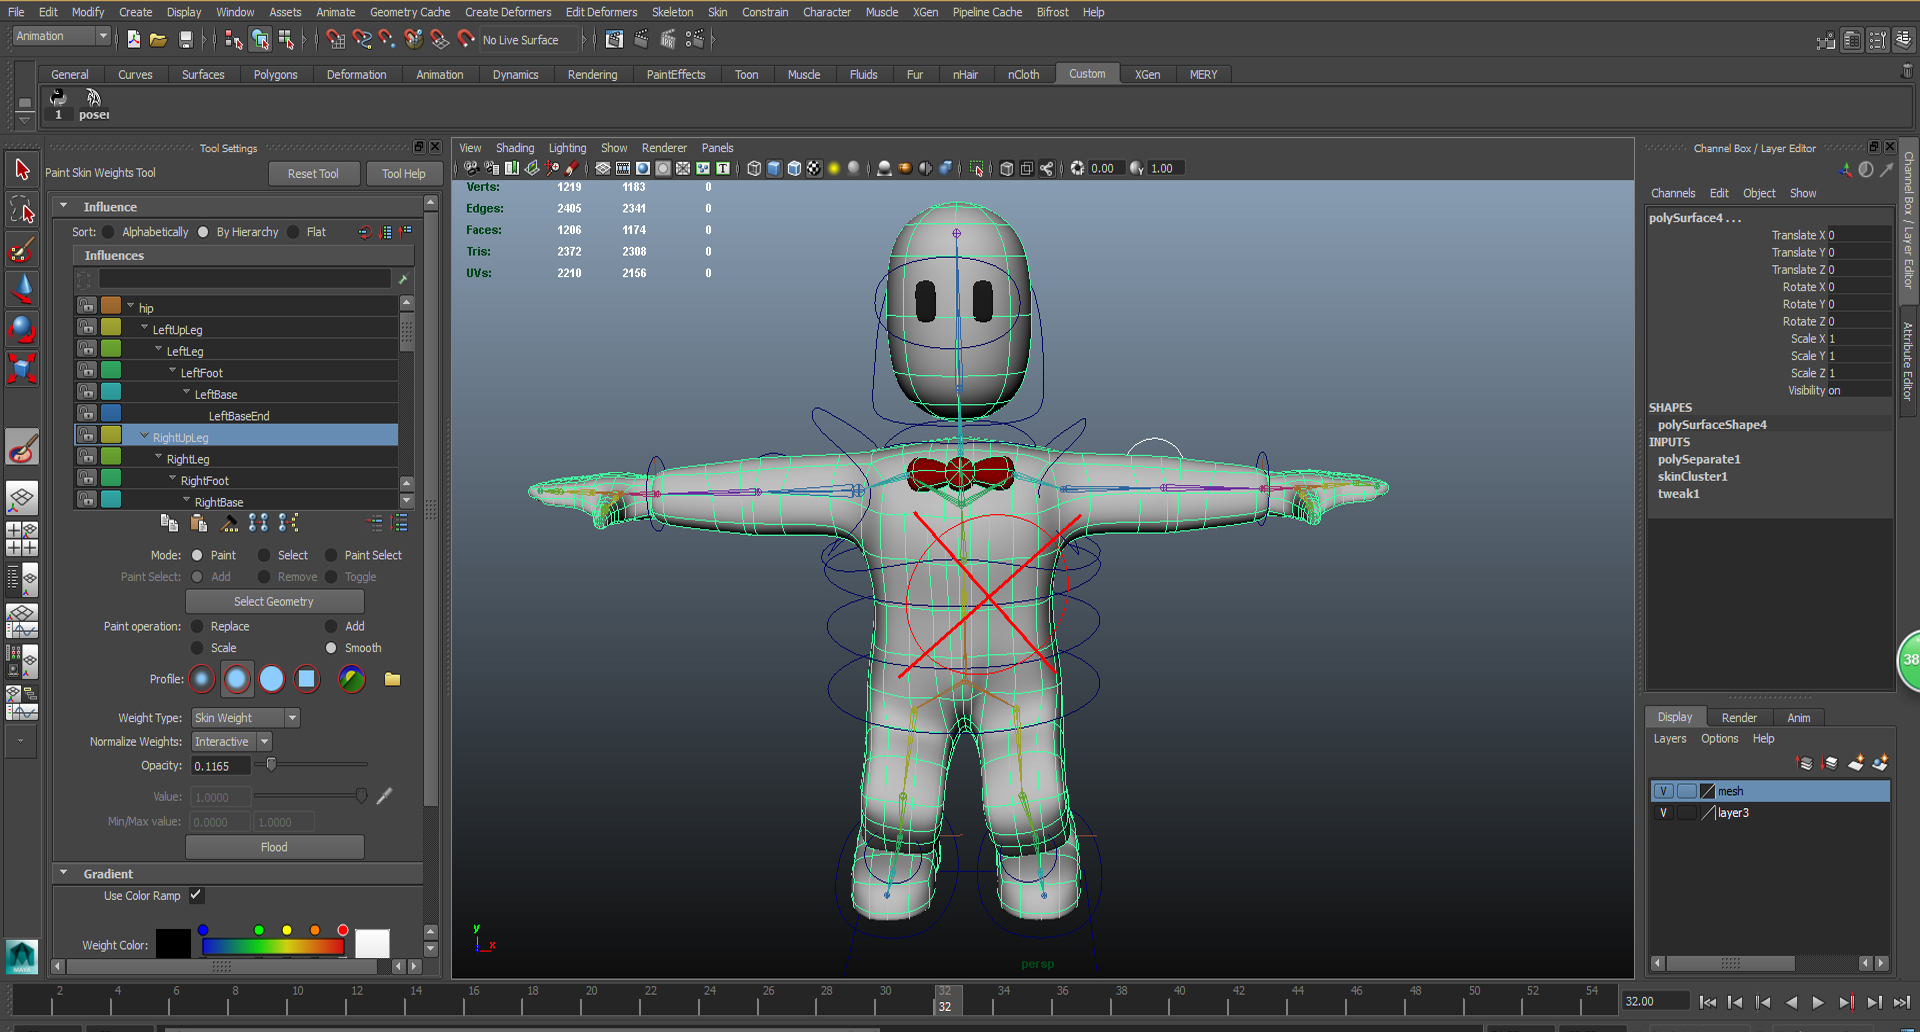 Solved: Paint Weight Tool Problem, Red Cross - Autodesk Community - Maya